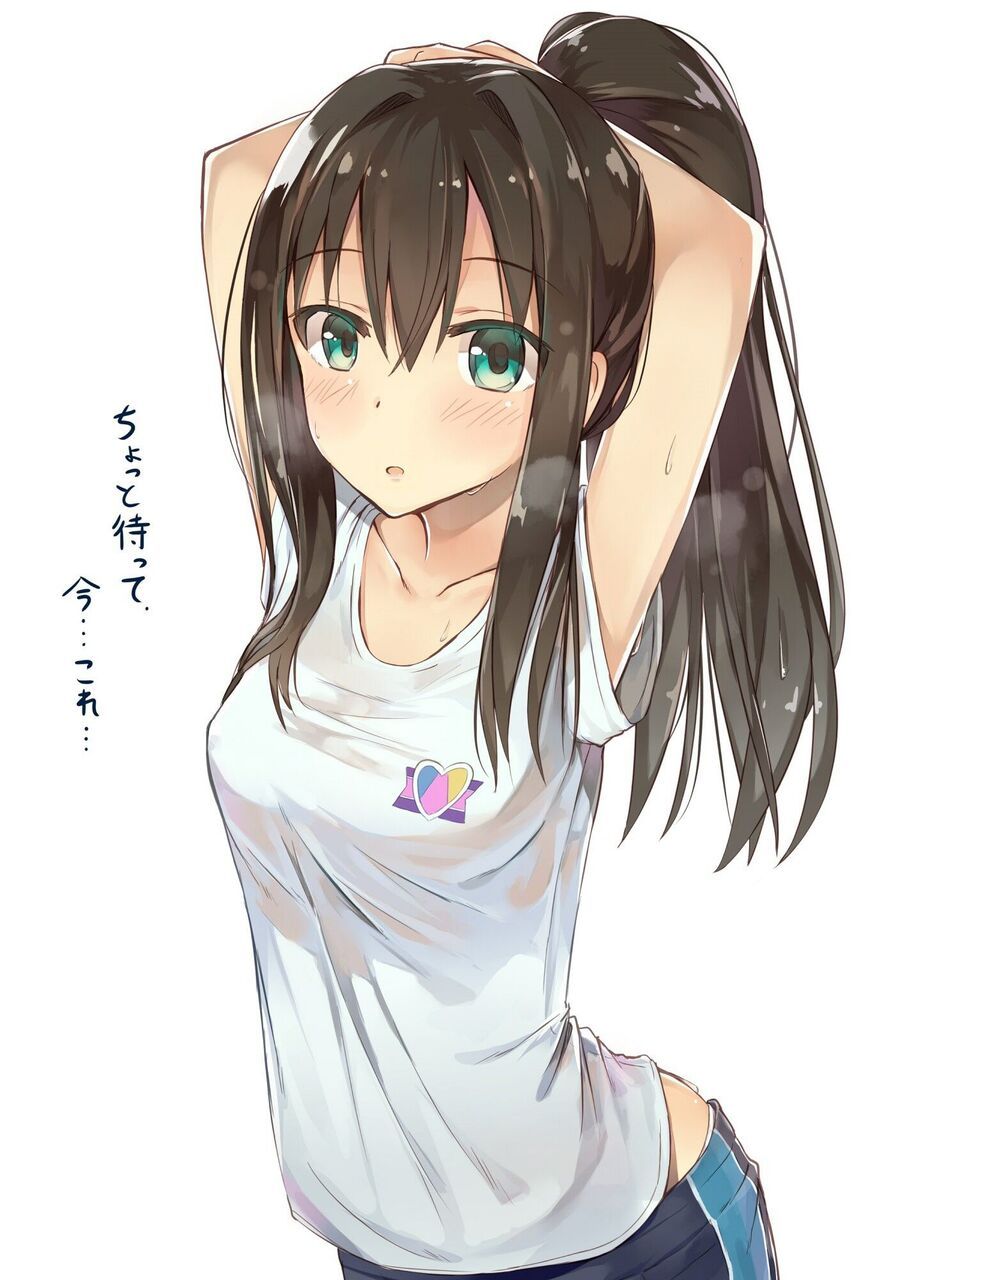 Cute 2D image of ponytail. 10